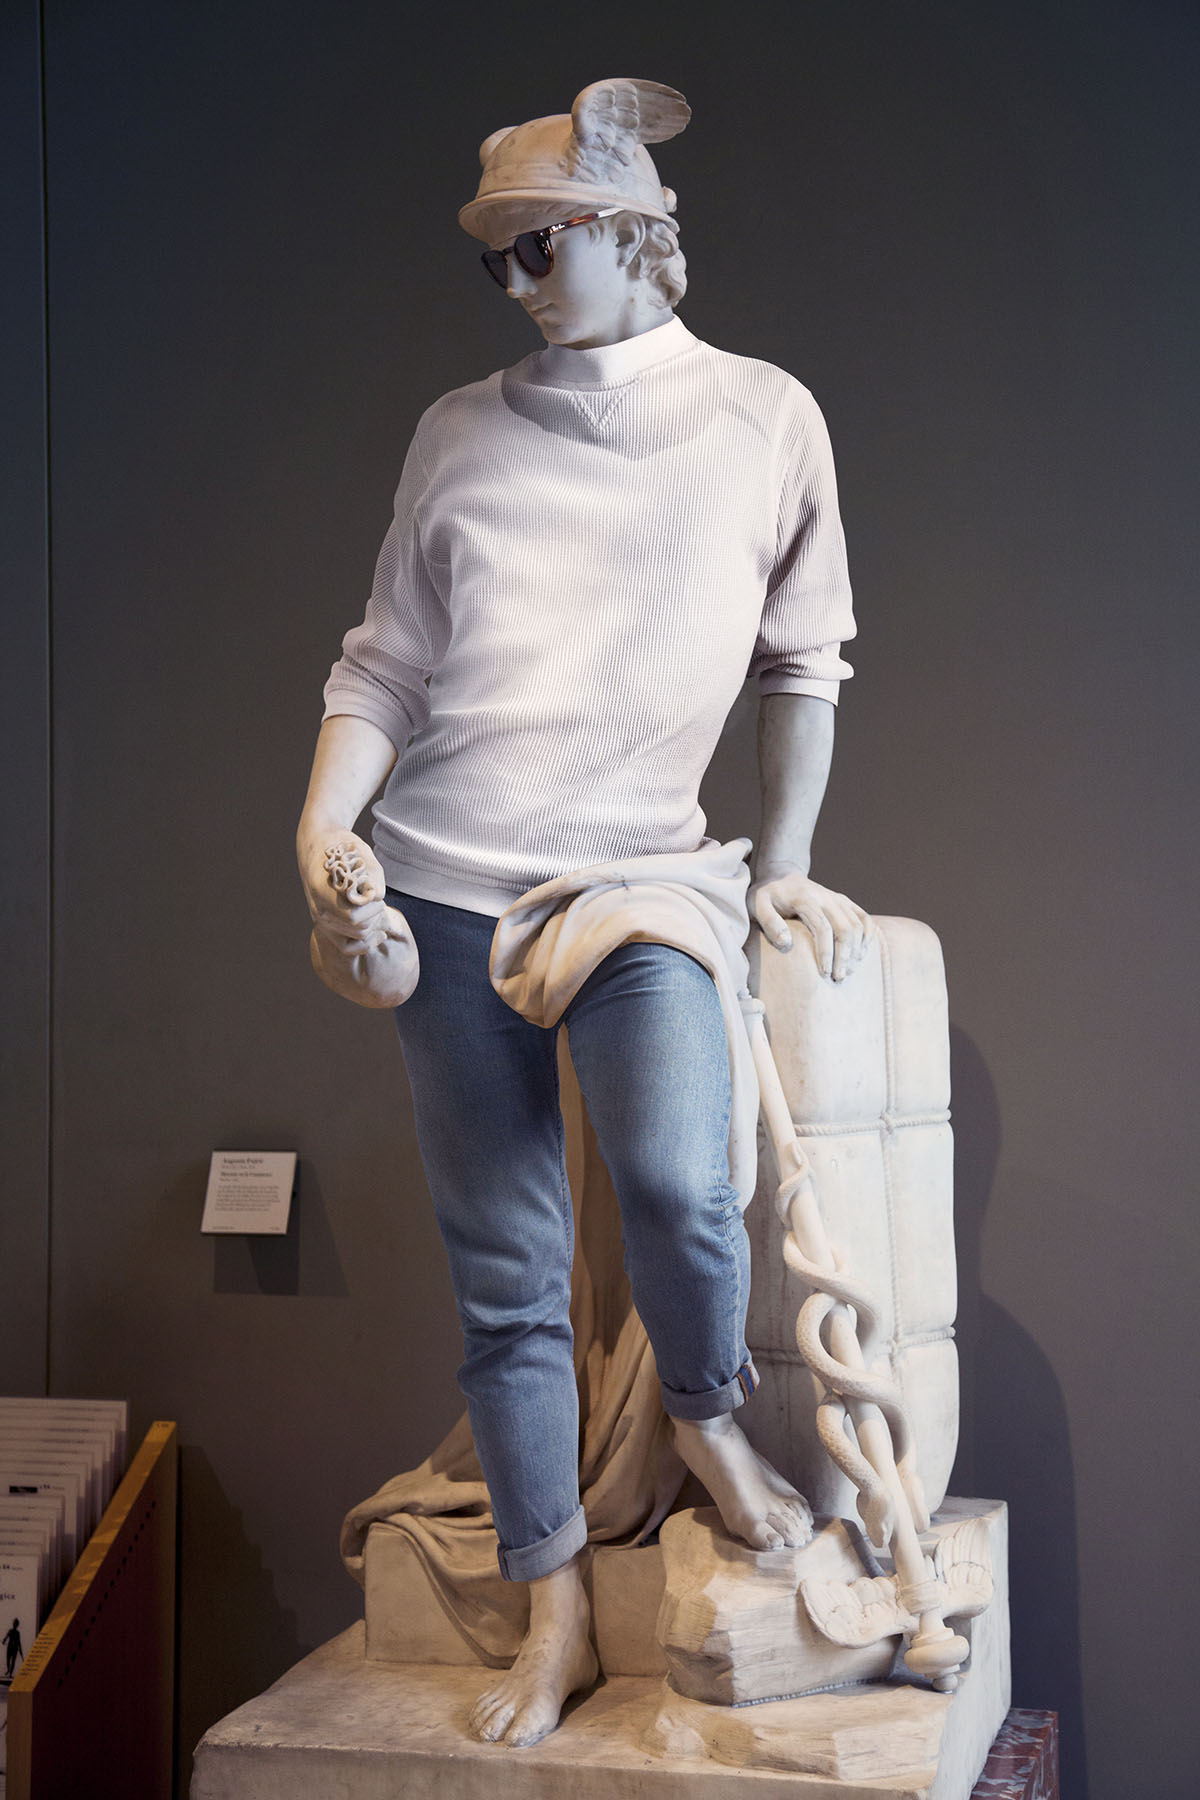 Ancient Greek sculptures dressed up in hipster clothing. : r/pics